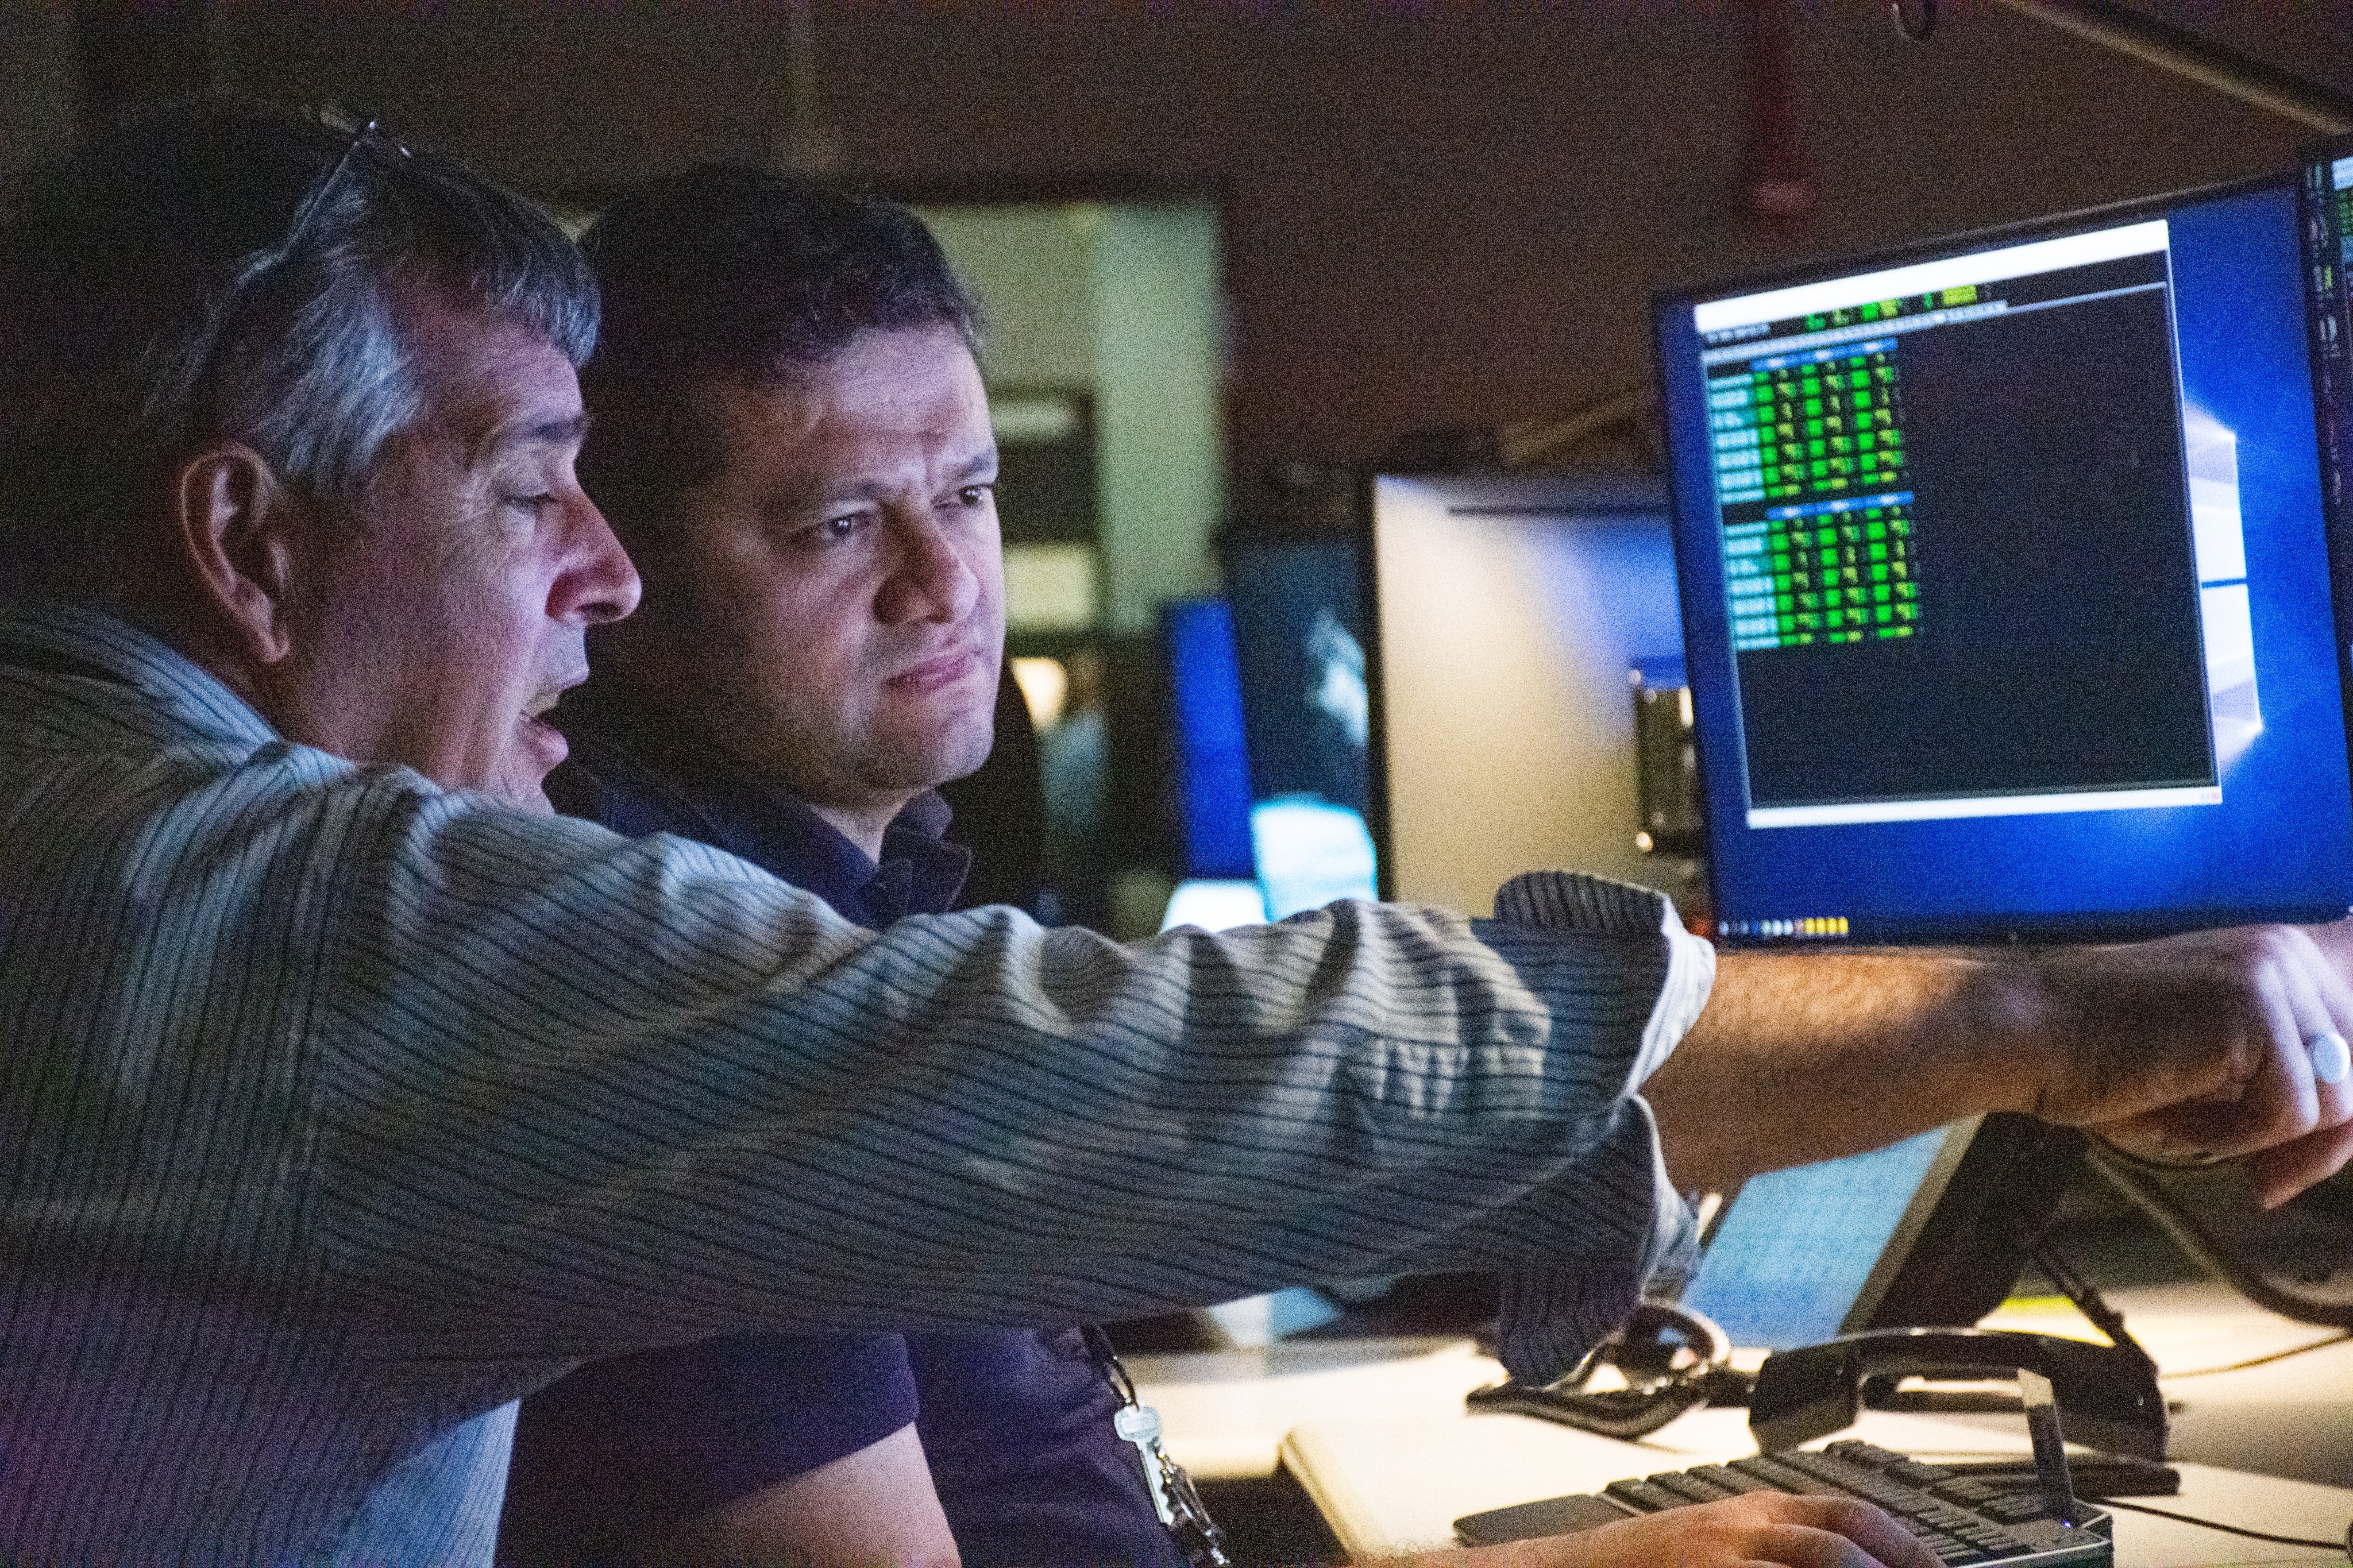 Two engineers talk about the stability of the pointing system while looking at and pointing to data on a monitor.